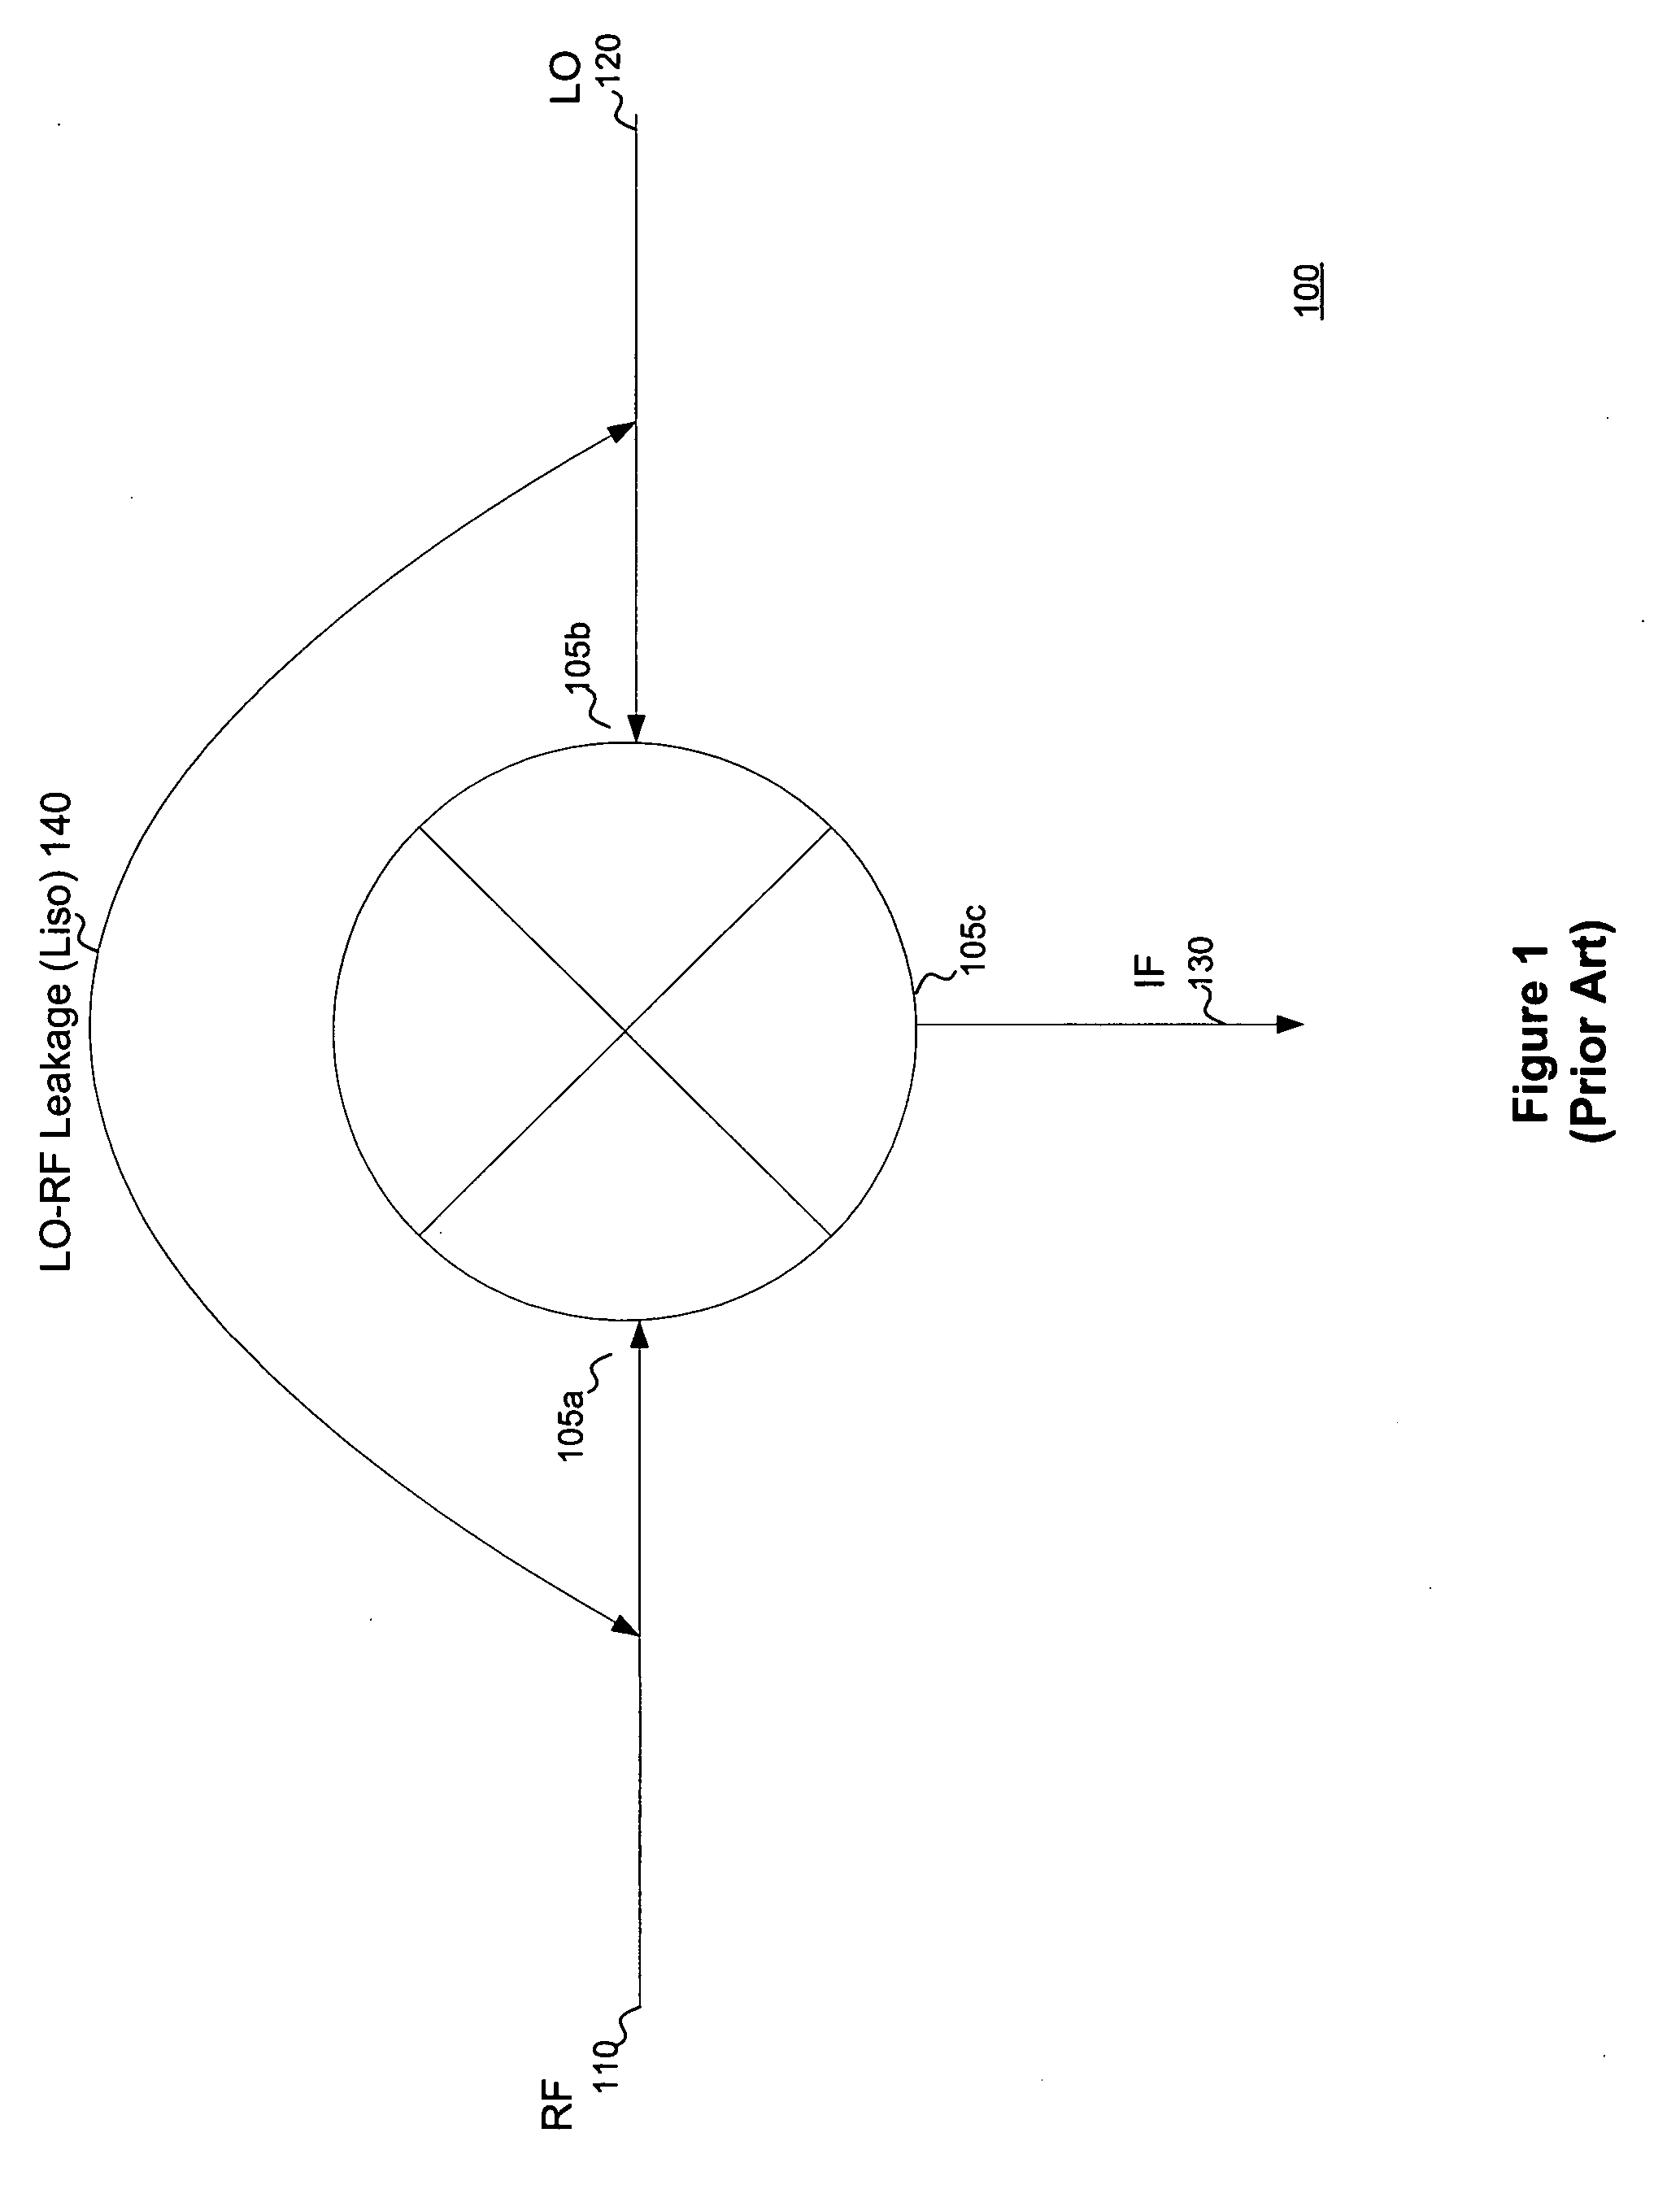 System and method for developing ultra-sensitive microwave and millimeter wave phase discriminators